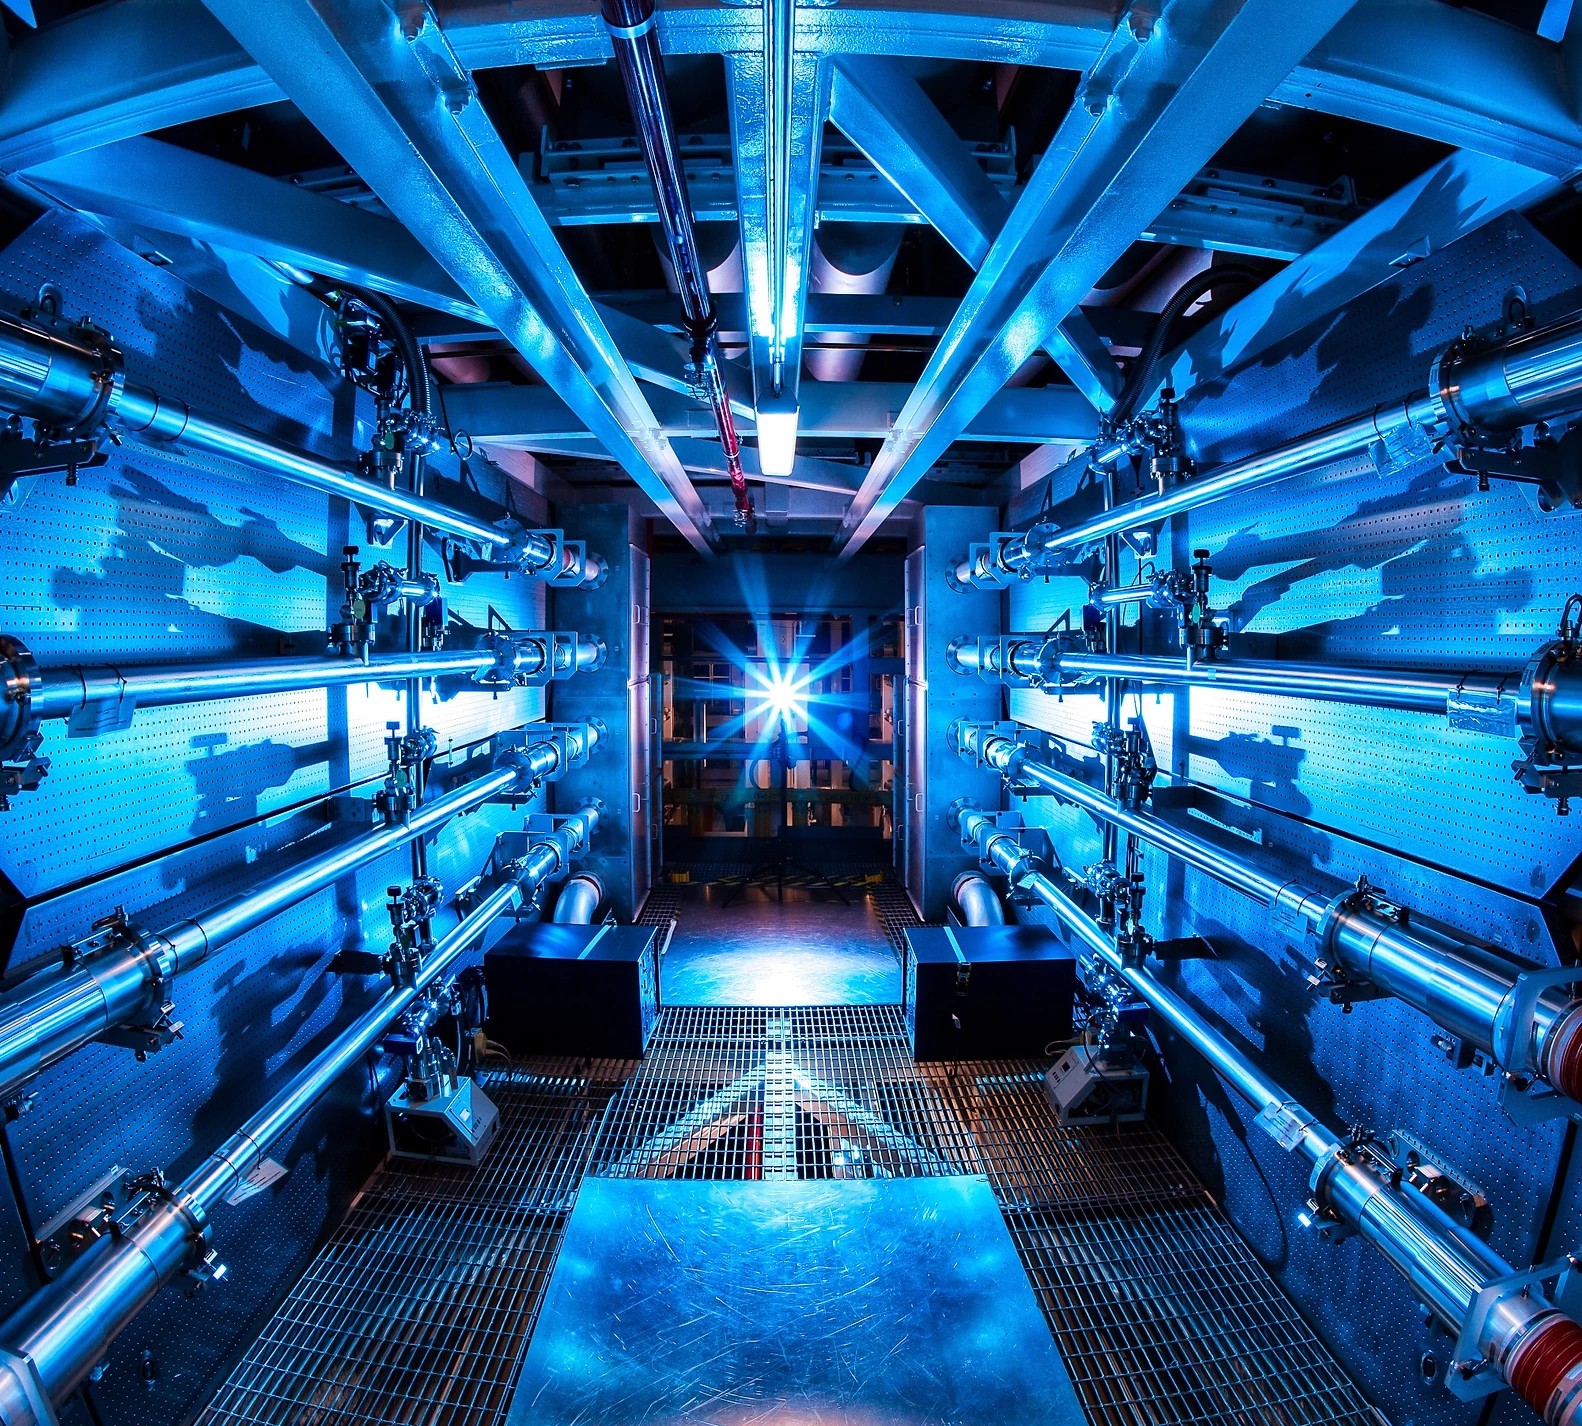 A view of a small part of the laser system at Lawrence Livermore National Laboratory.